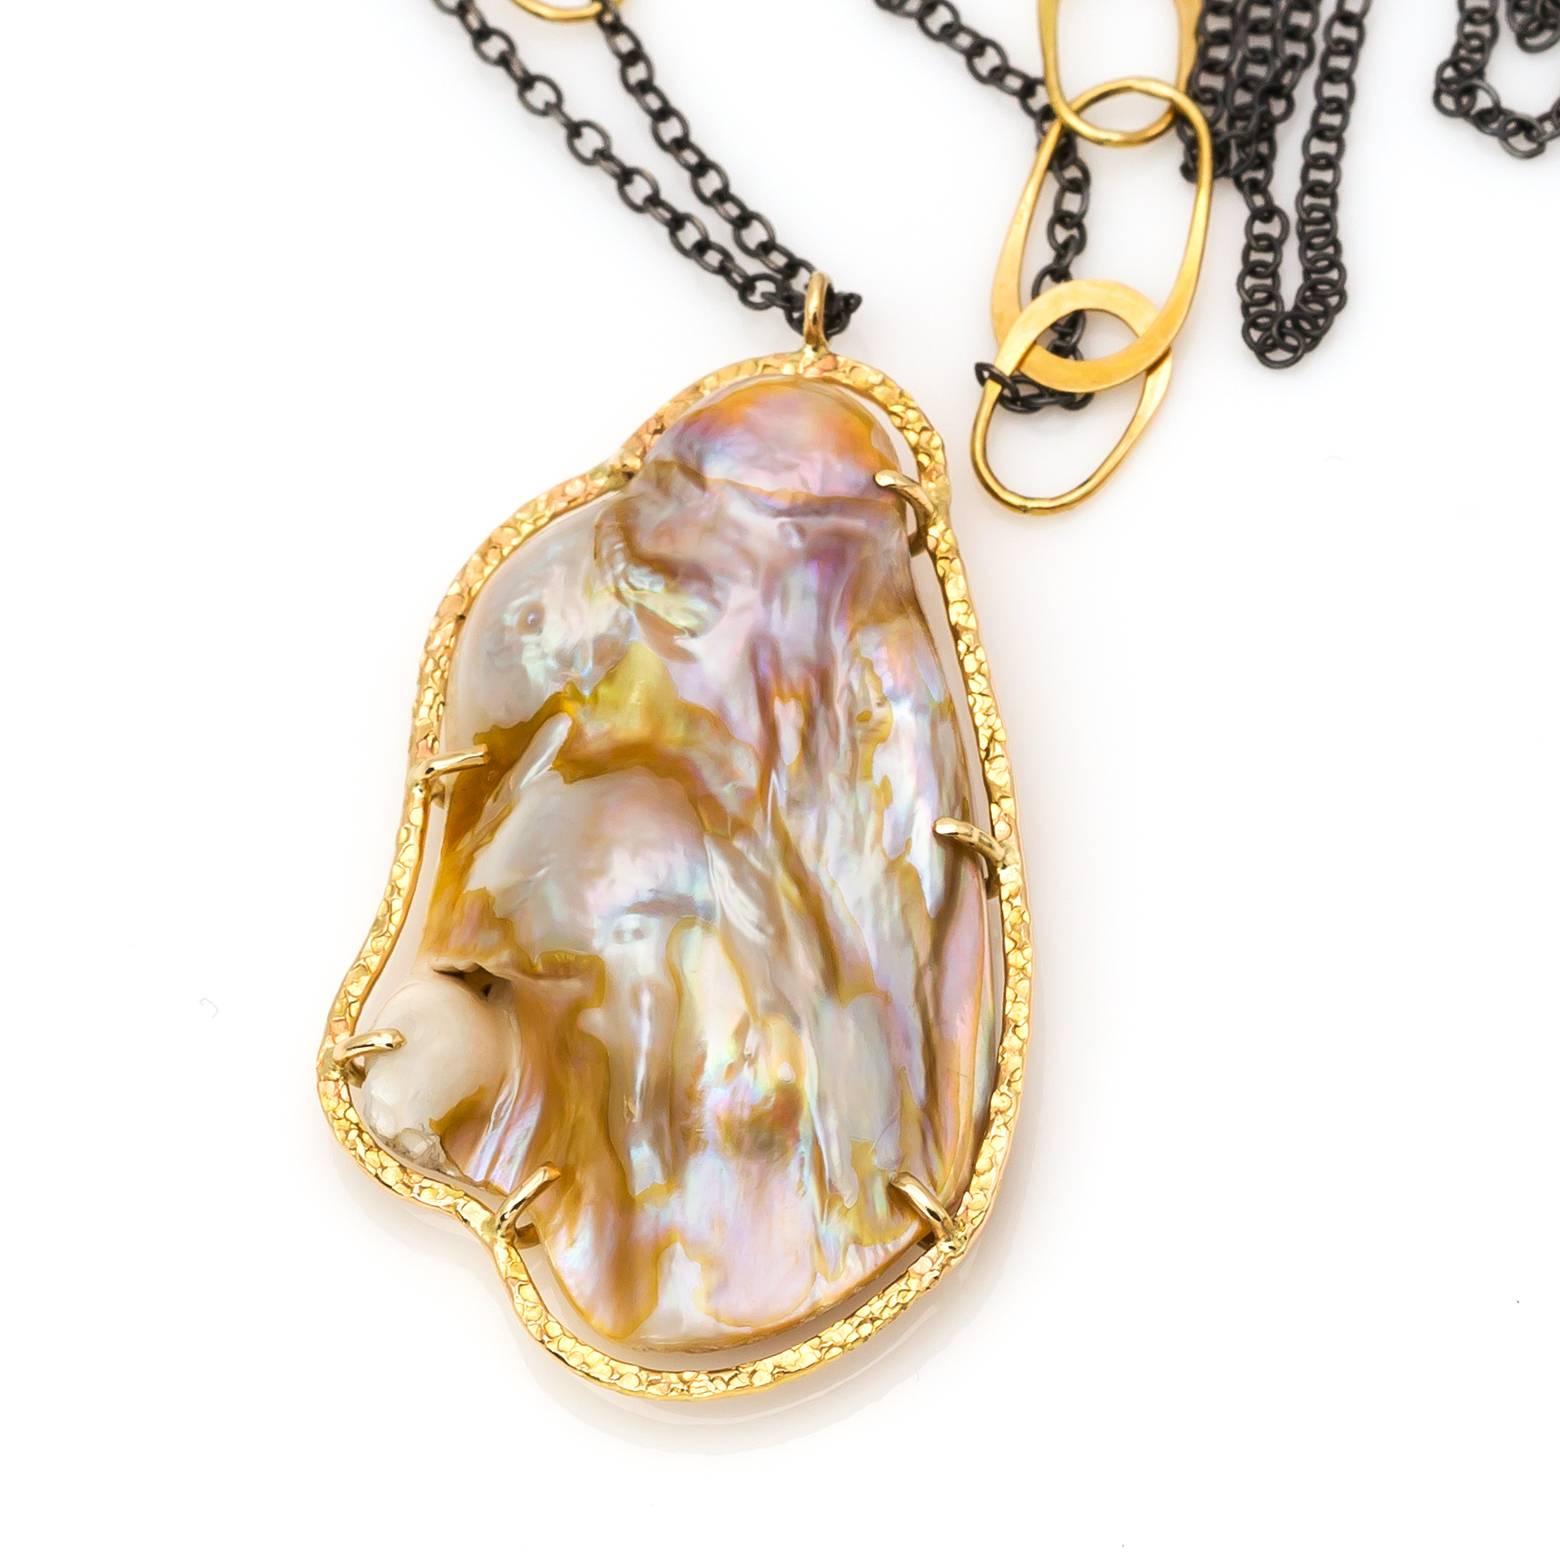 This organic shaped fresh water pearl glows in whites, pinks, and corals and is set in a beautiful hammered 14K yellow gold bezel. Hangs from a 32 inch oxidized sterling silver chain. Stunning and substantial!